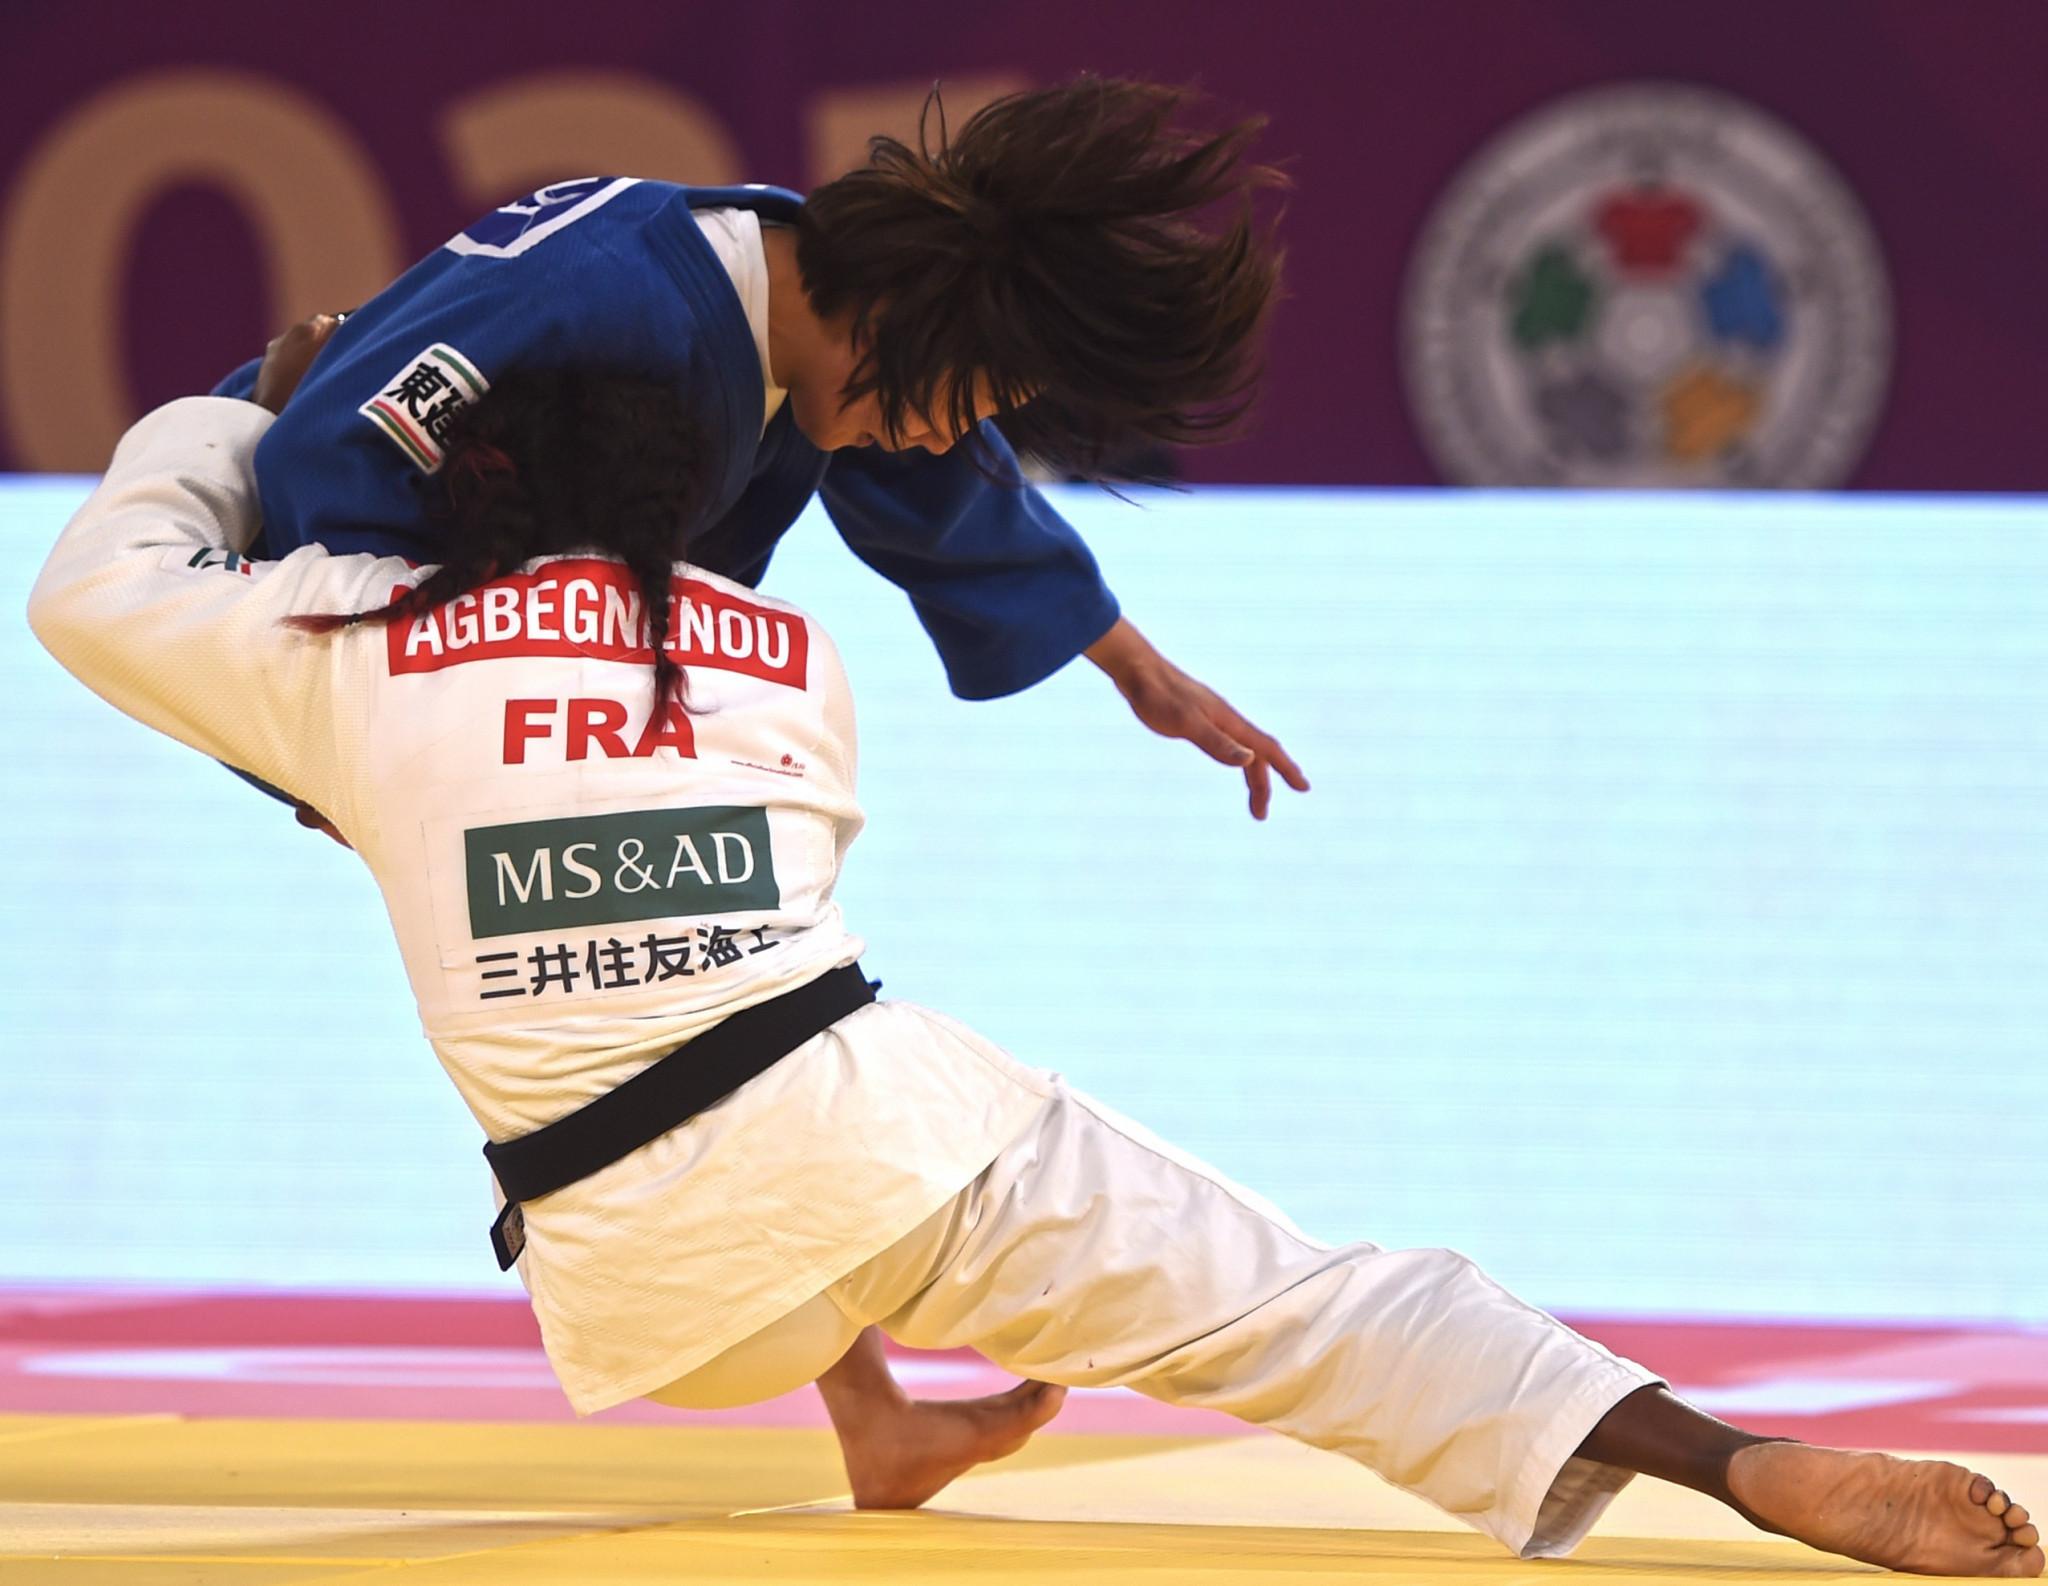 Four-time world champion Agbegnenou earns gold at IJF World Judo Masters